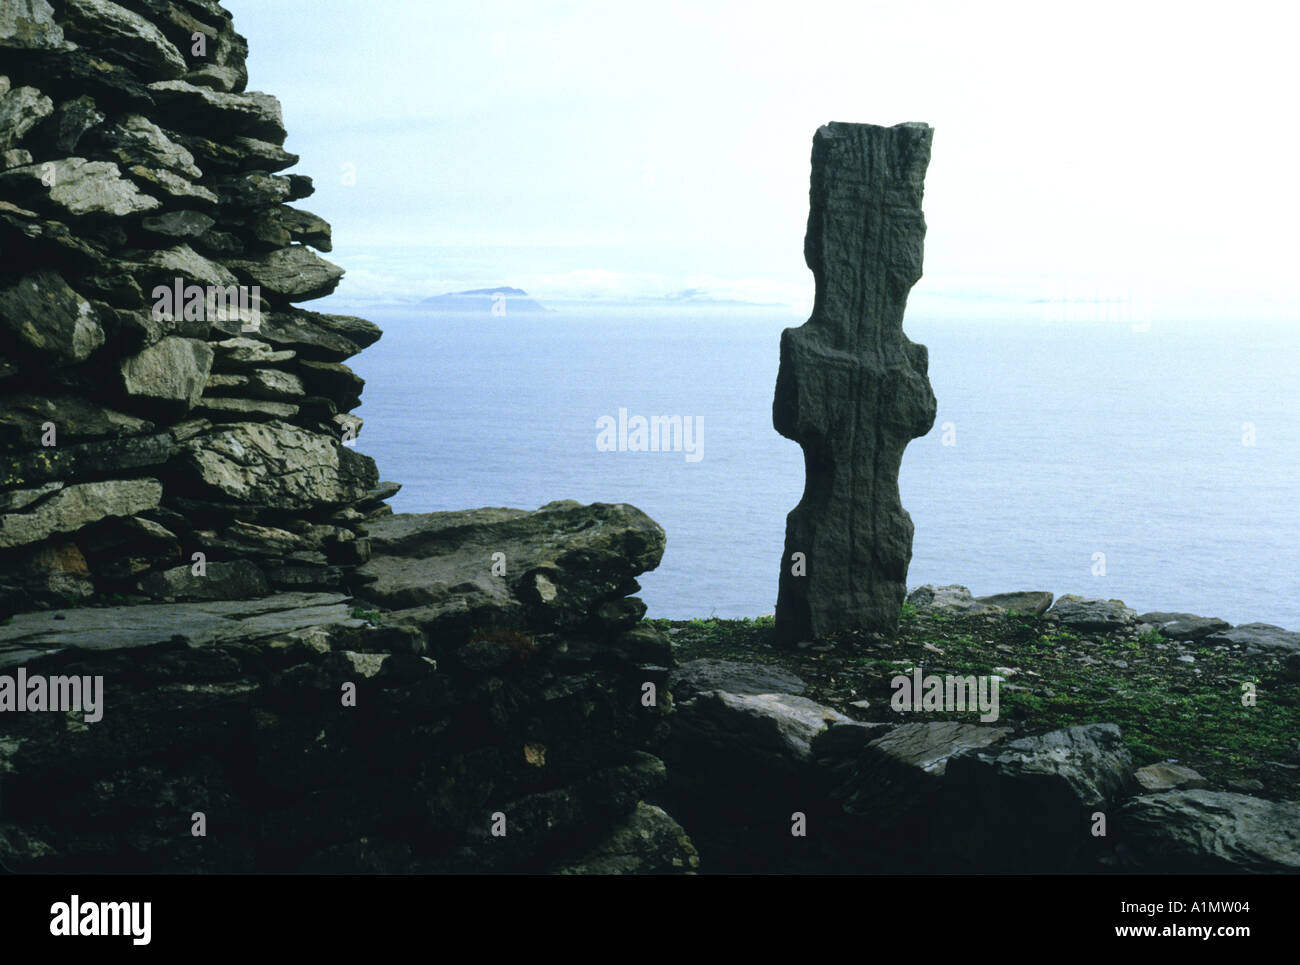 ANCIENT CROSS IN SKELLIG MICHAEL HUGELY IMPORTANT  HISTORIC MONASTERY off CO KERRY  COAST IRELAND Stock Photo